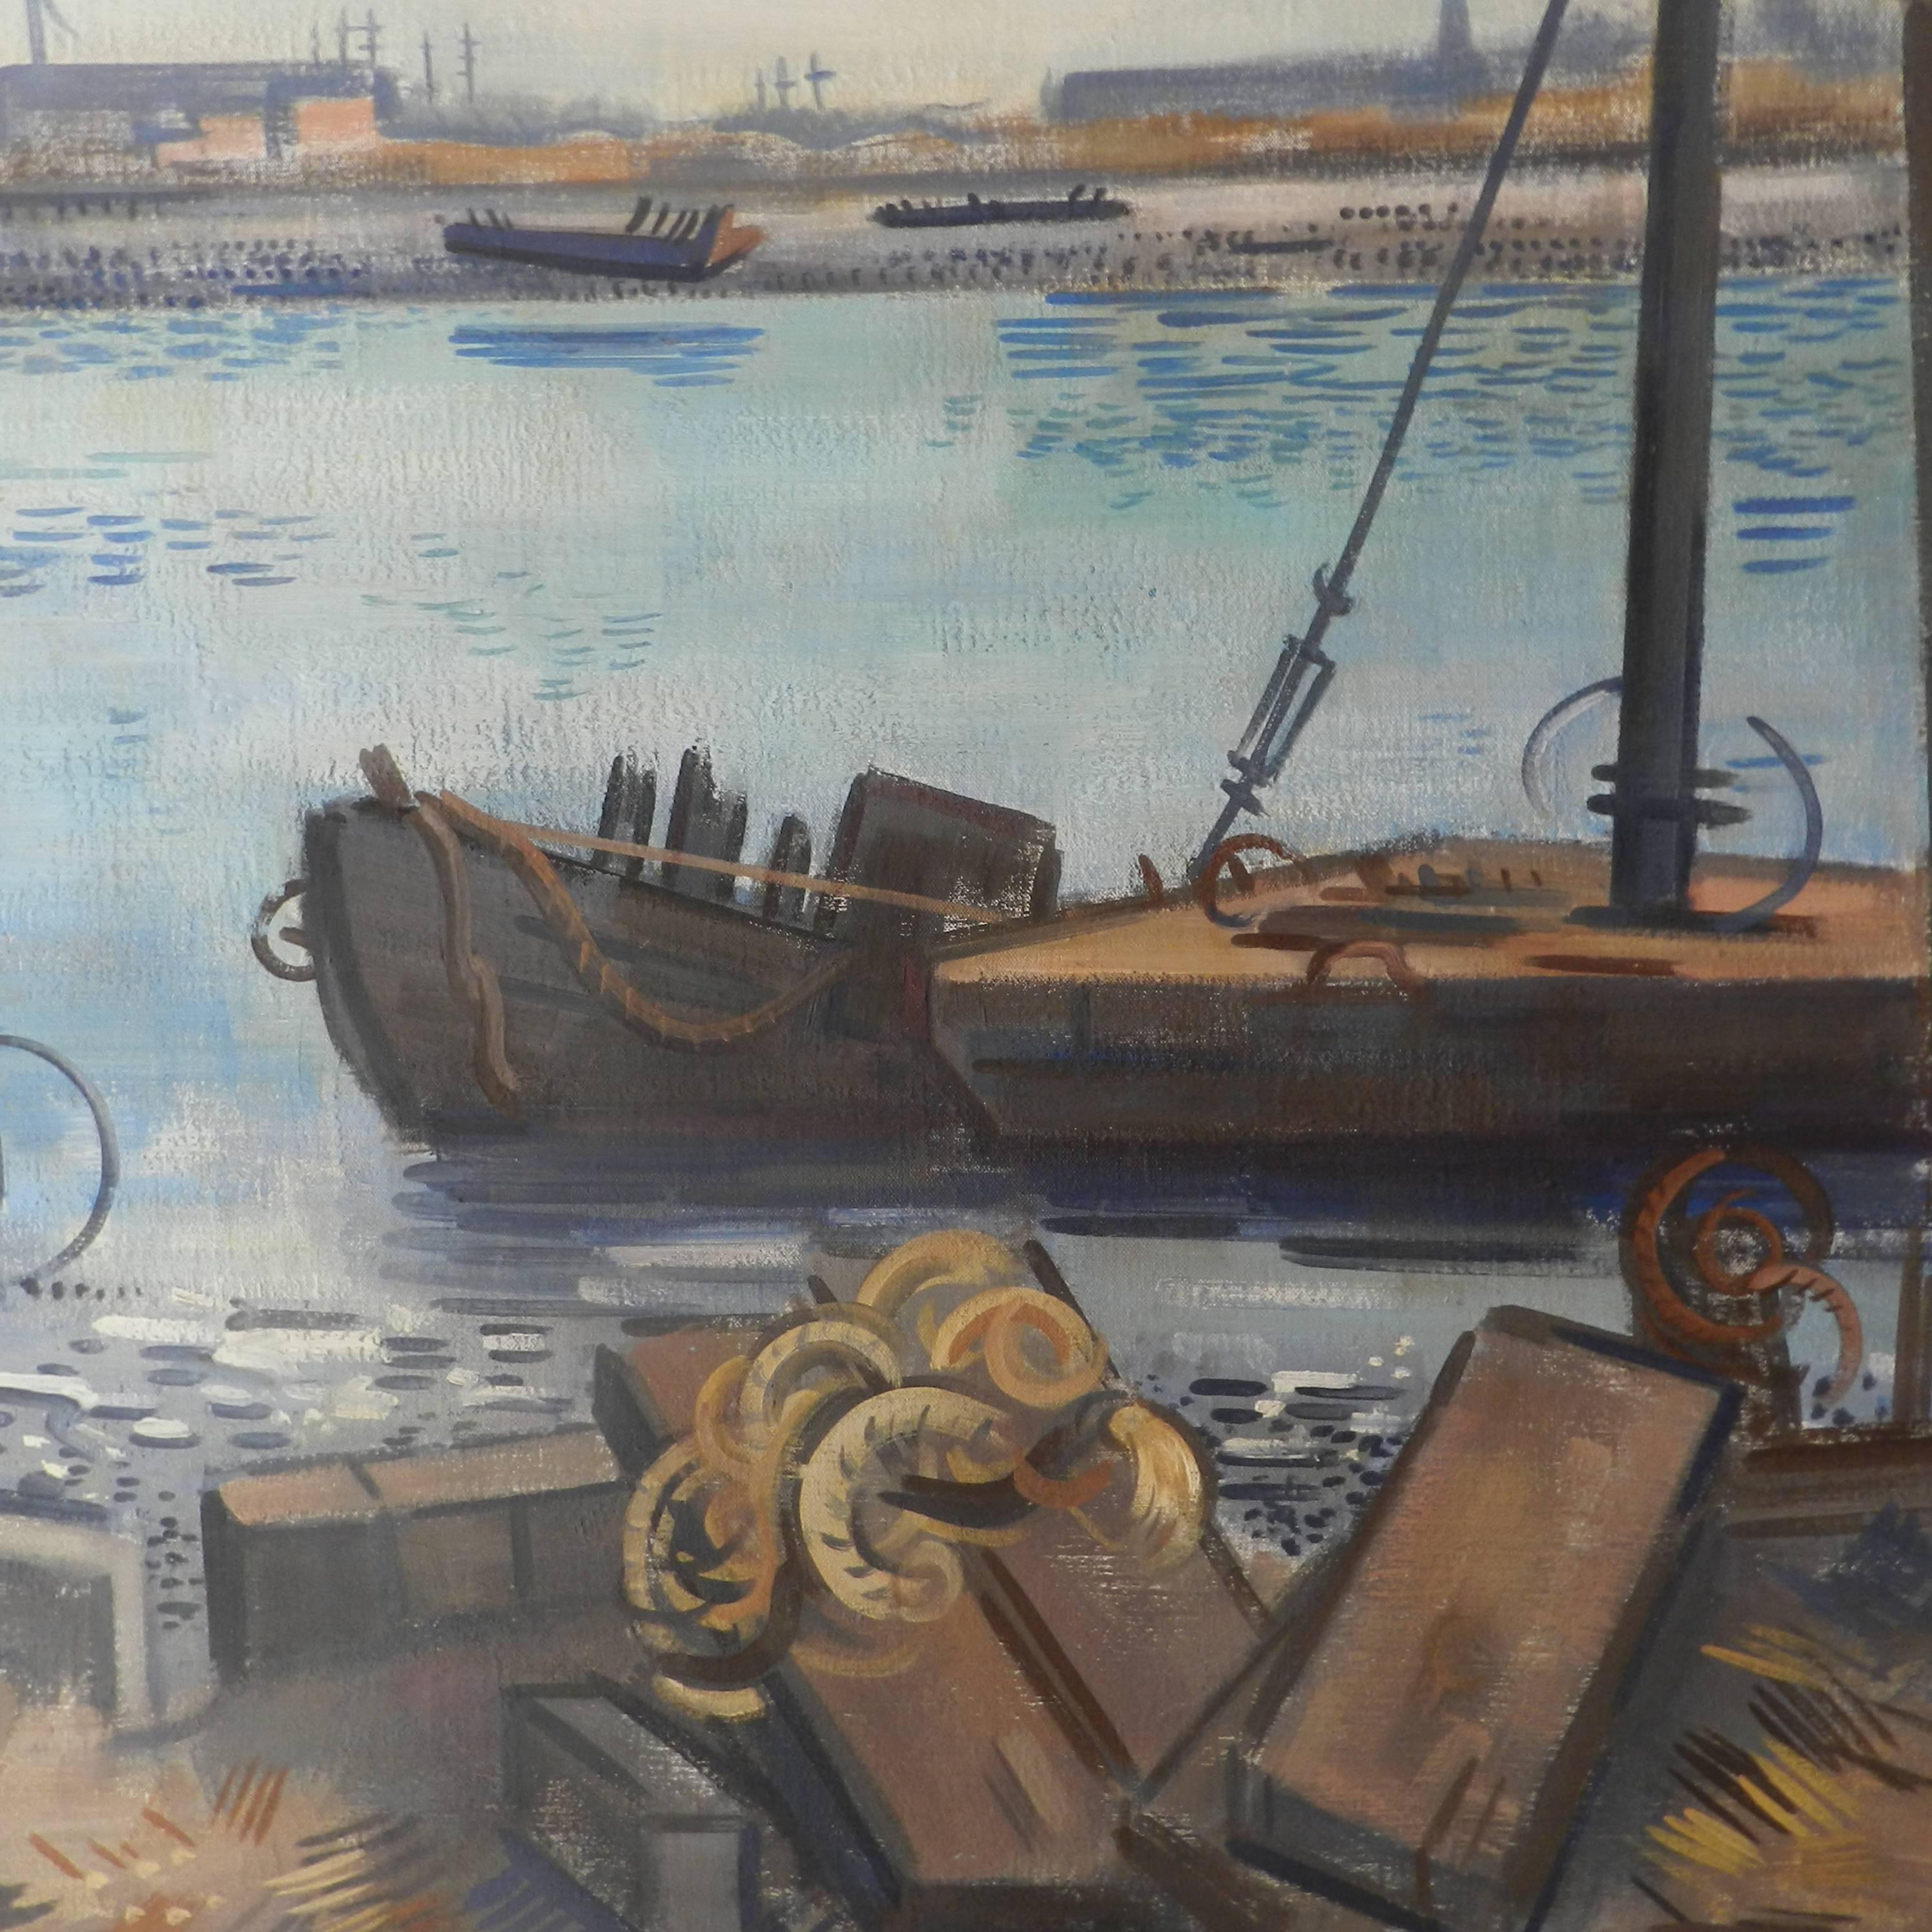 This nice harbor boat scene oil on canvas painting is by Earle Loran, 1905-1999. Earle Loran was active in California, New York and France. Earle Loran is known for modernist urban-coast views and geometric painting.